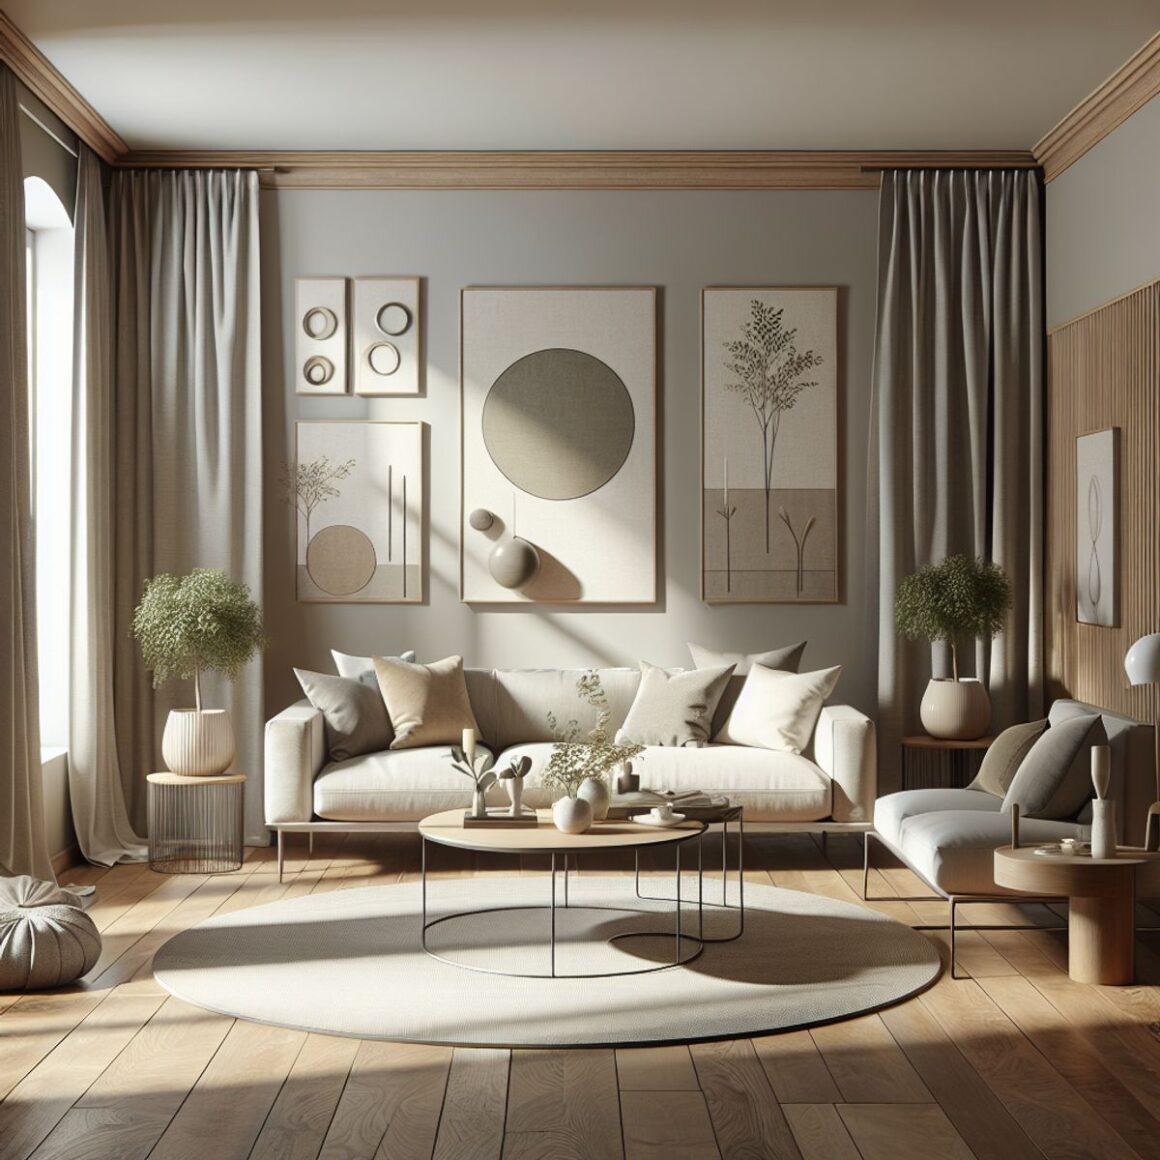 A cozy living room with a neutral color palette, natural window curtains, comfortable seating, a coffee table, decorative plants, and sophisticated wall art.